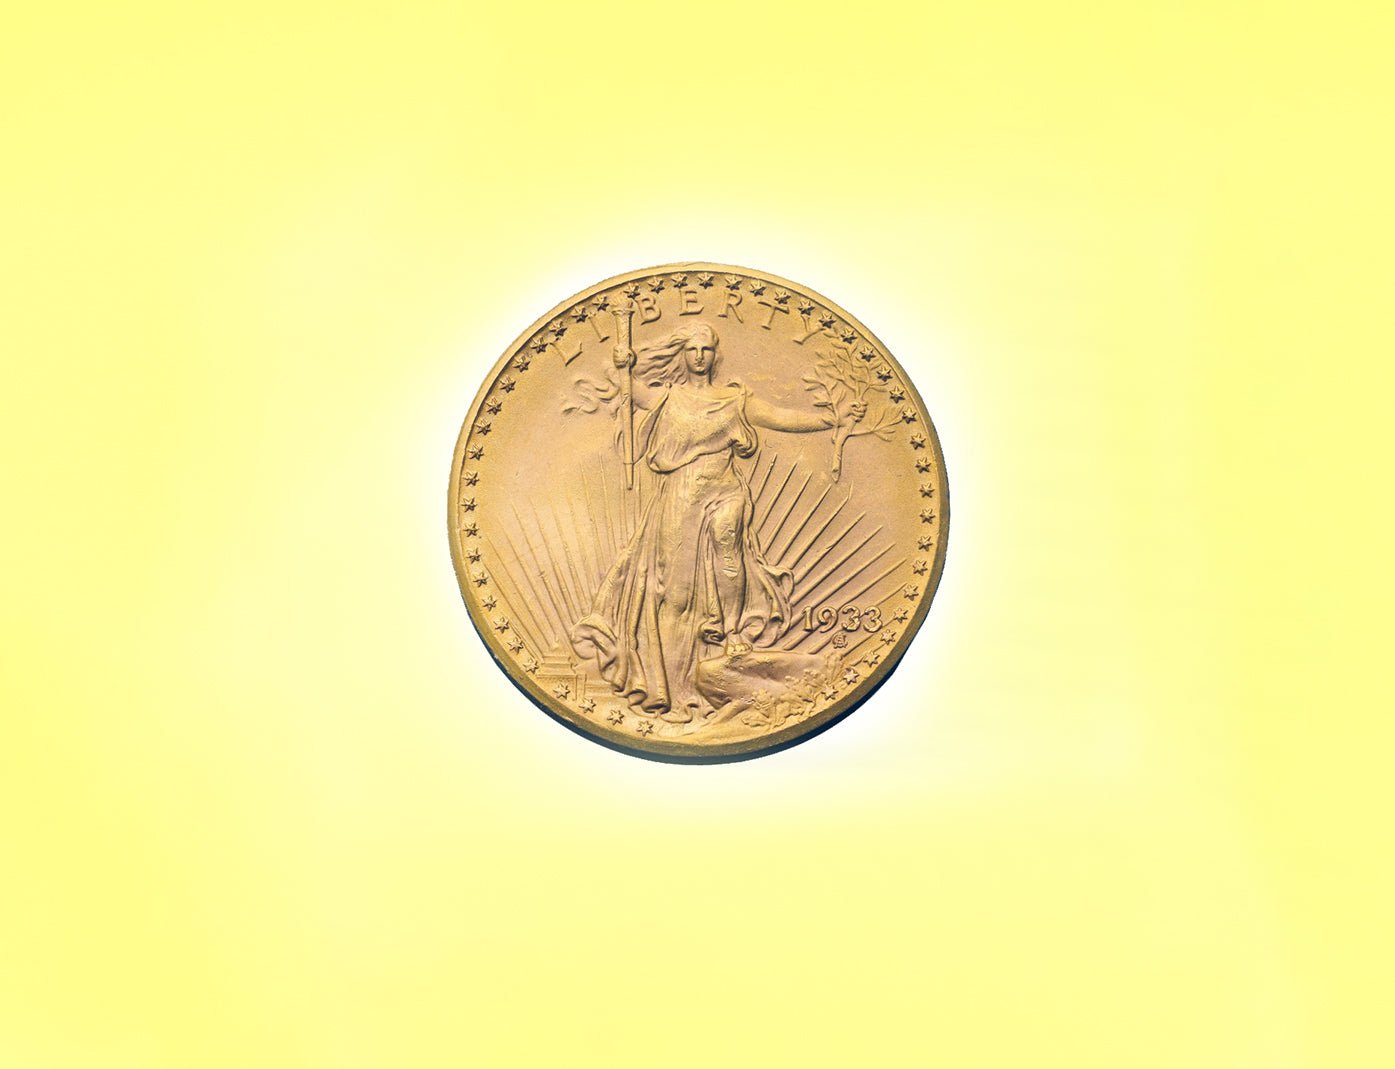 The Most Expensive Gold Coin Ever Sold at an Auction